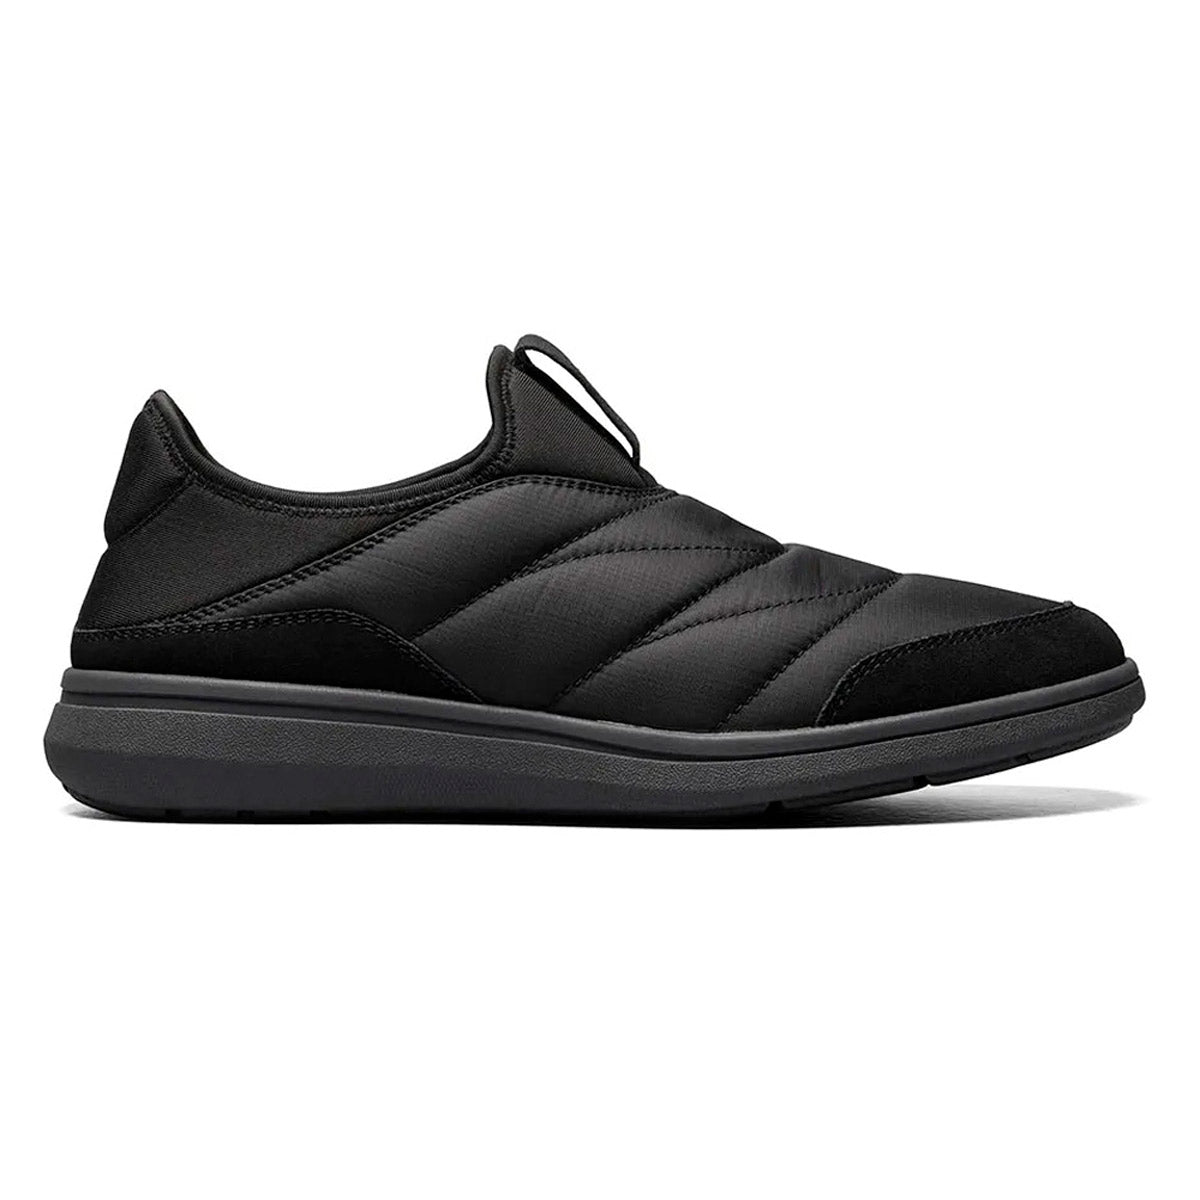 Black Florsheim Java Moc Nylon slip-on sneaker with a quilted upper and a non-marking rubber outsole, featuring a pull tab on the heel.